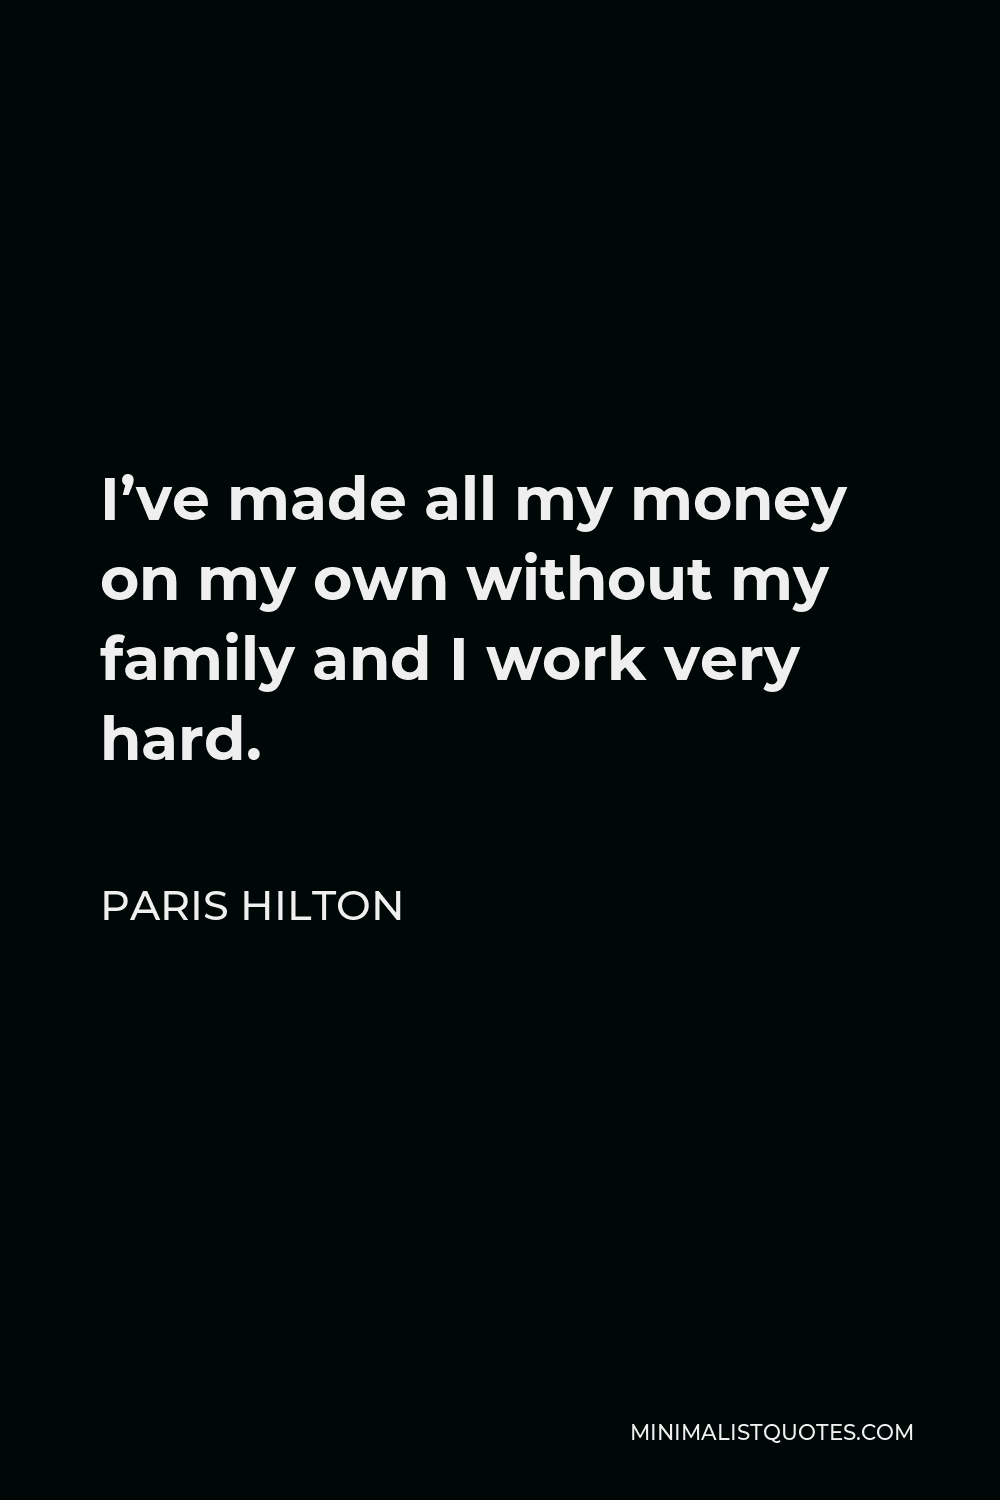 Paris Hilton Quote - I’ve made all my money on my own without my family and I work very hard.